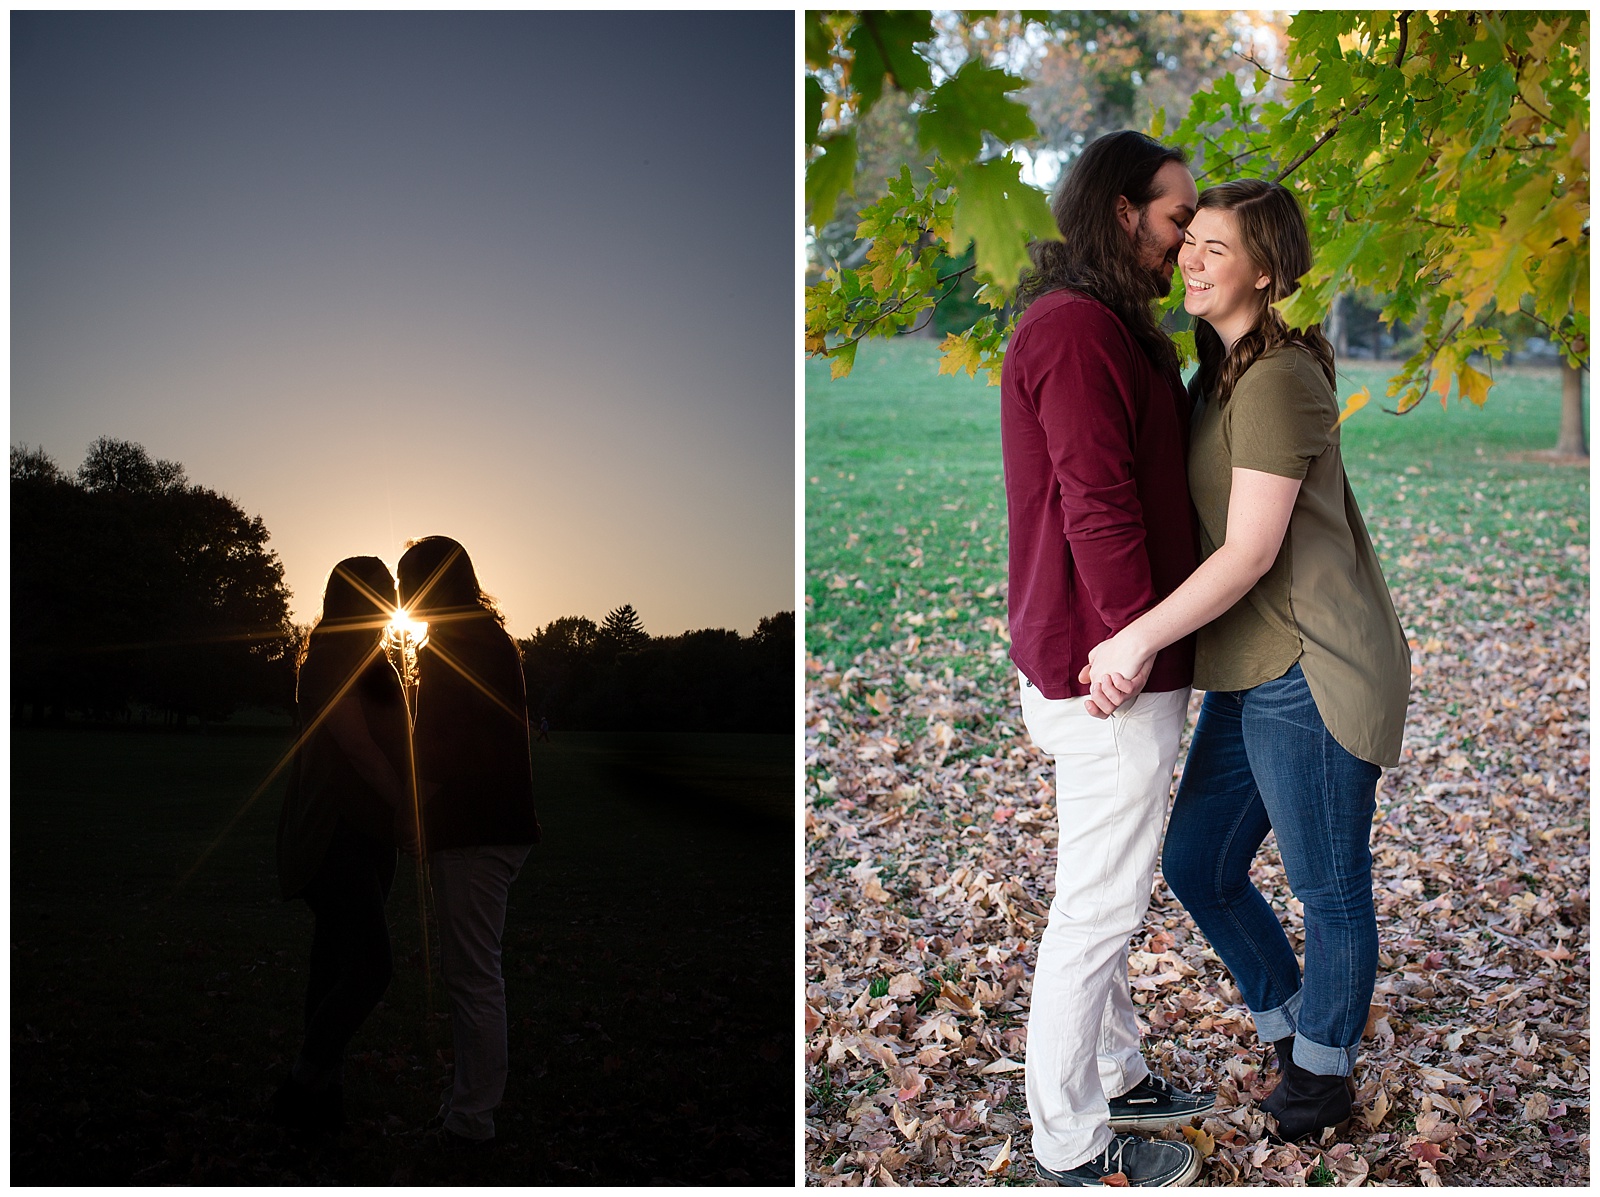 A Loose Park engagement session in Kansas City.